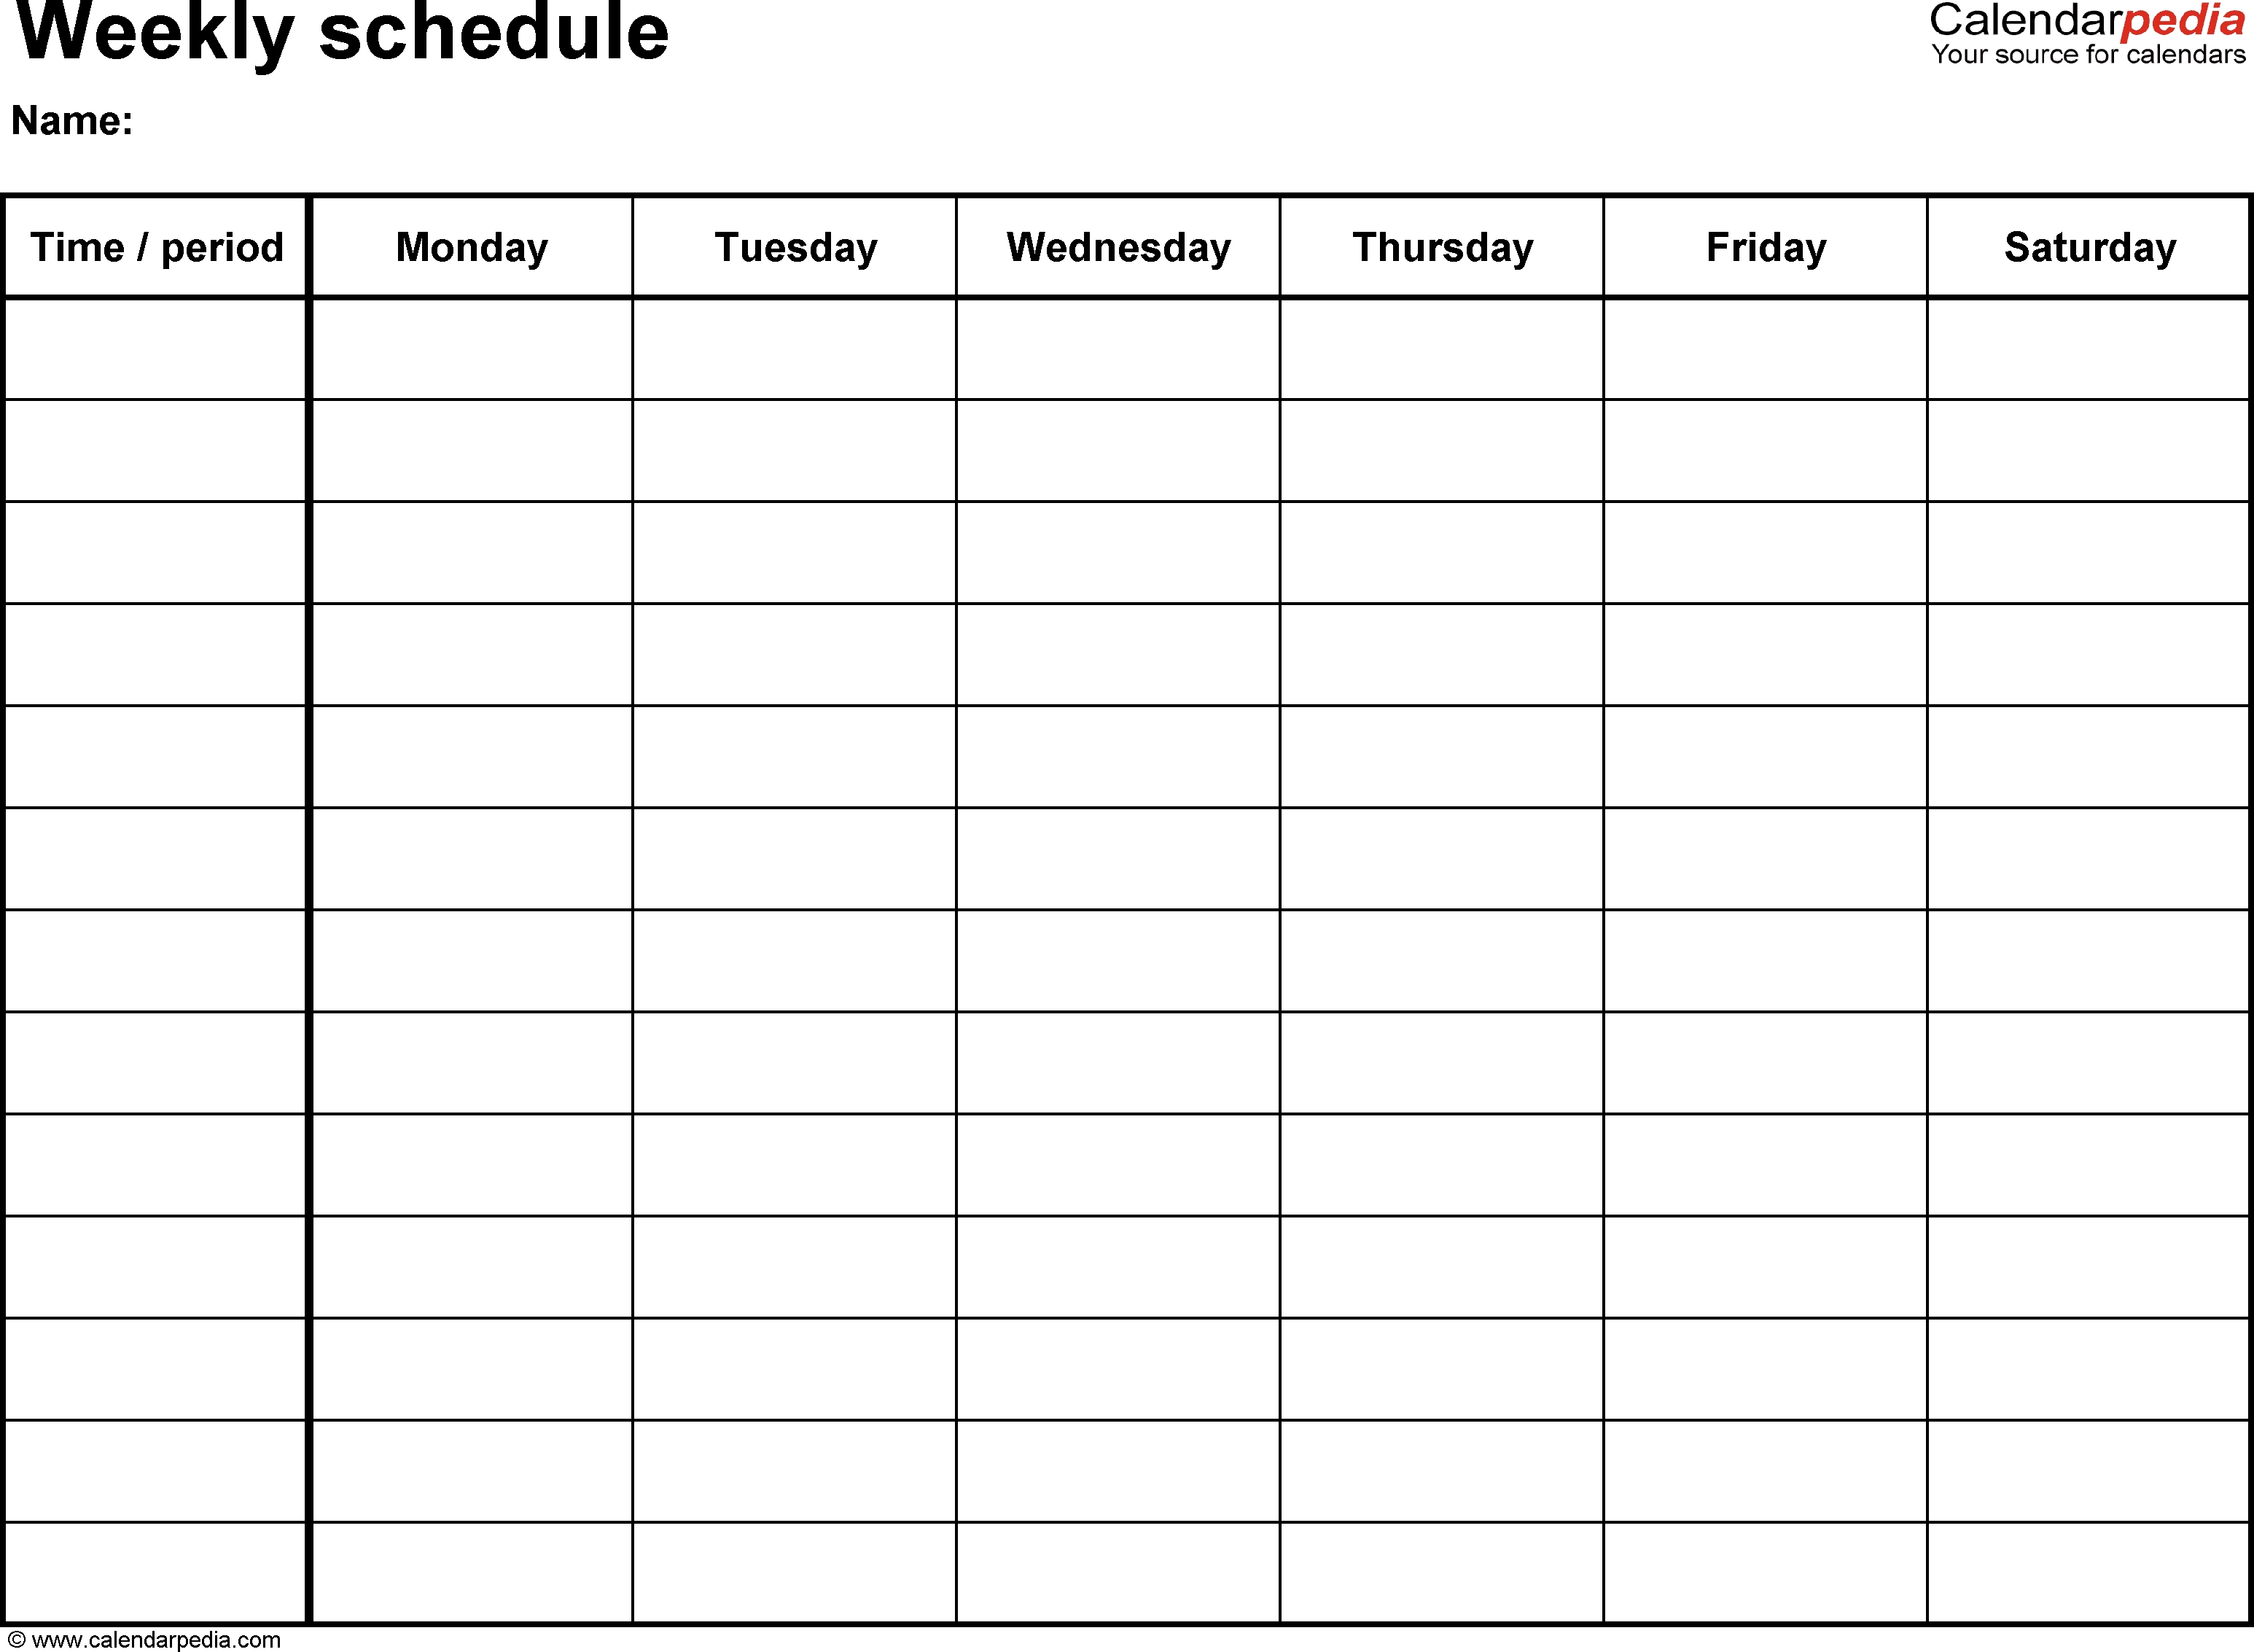 Free Weekly Schedule Templates For Excel - 18 Templates regarding One Week Calendar Template Exercise